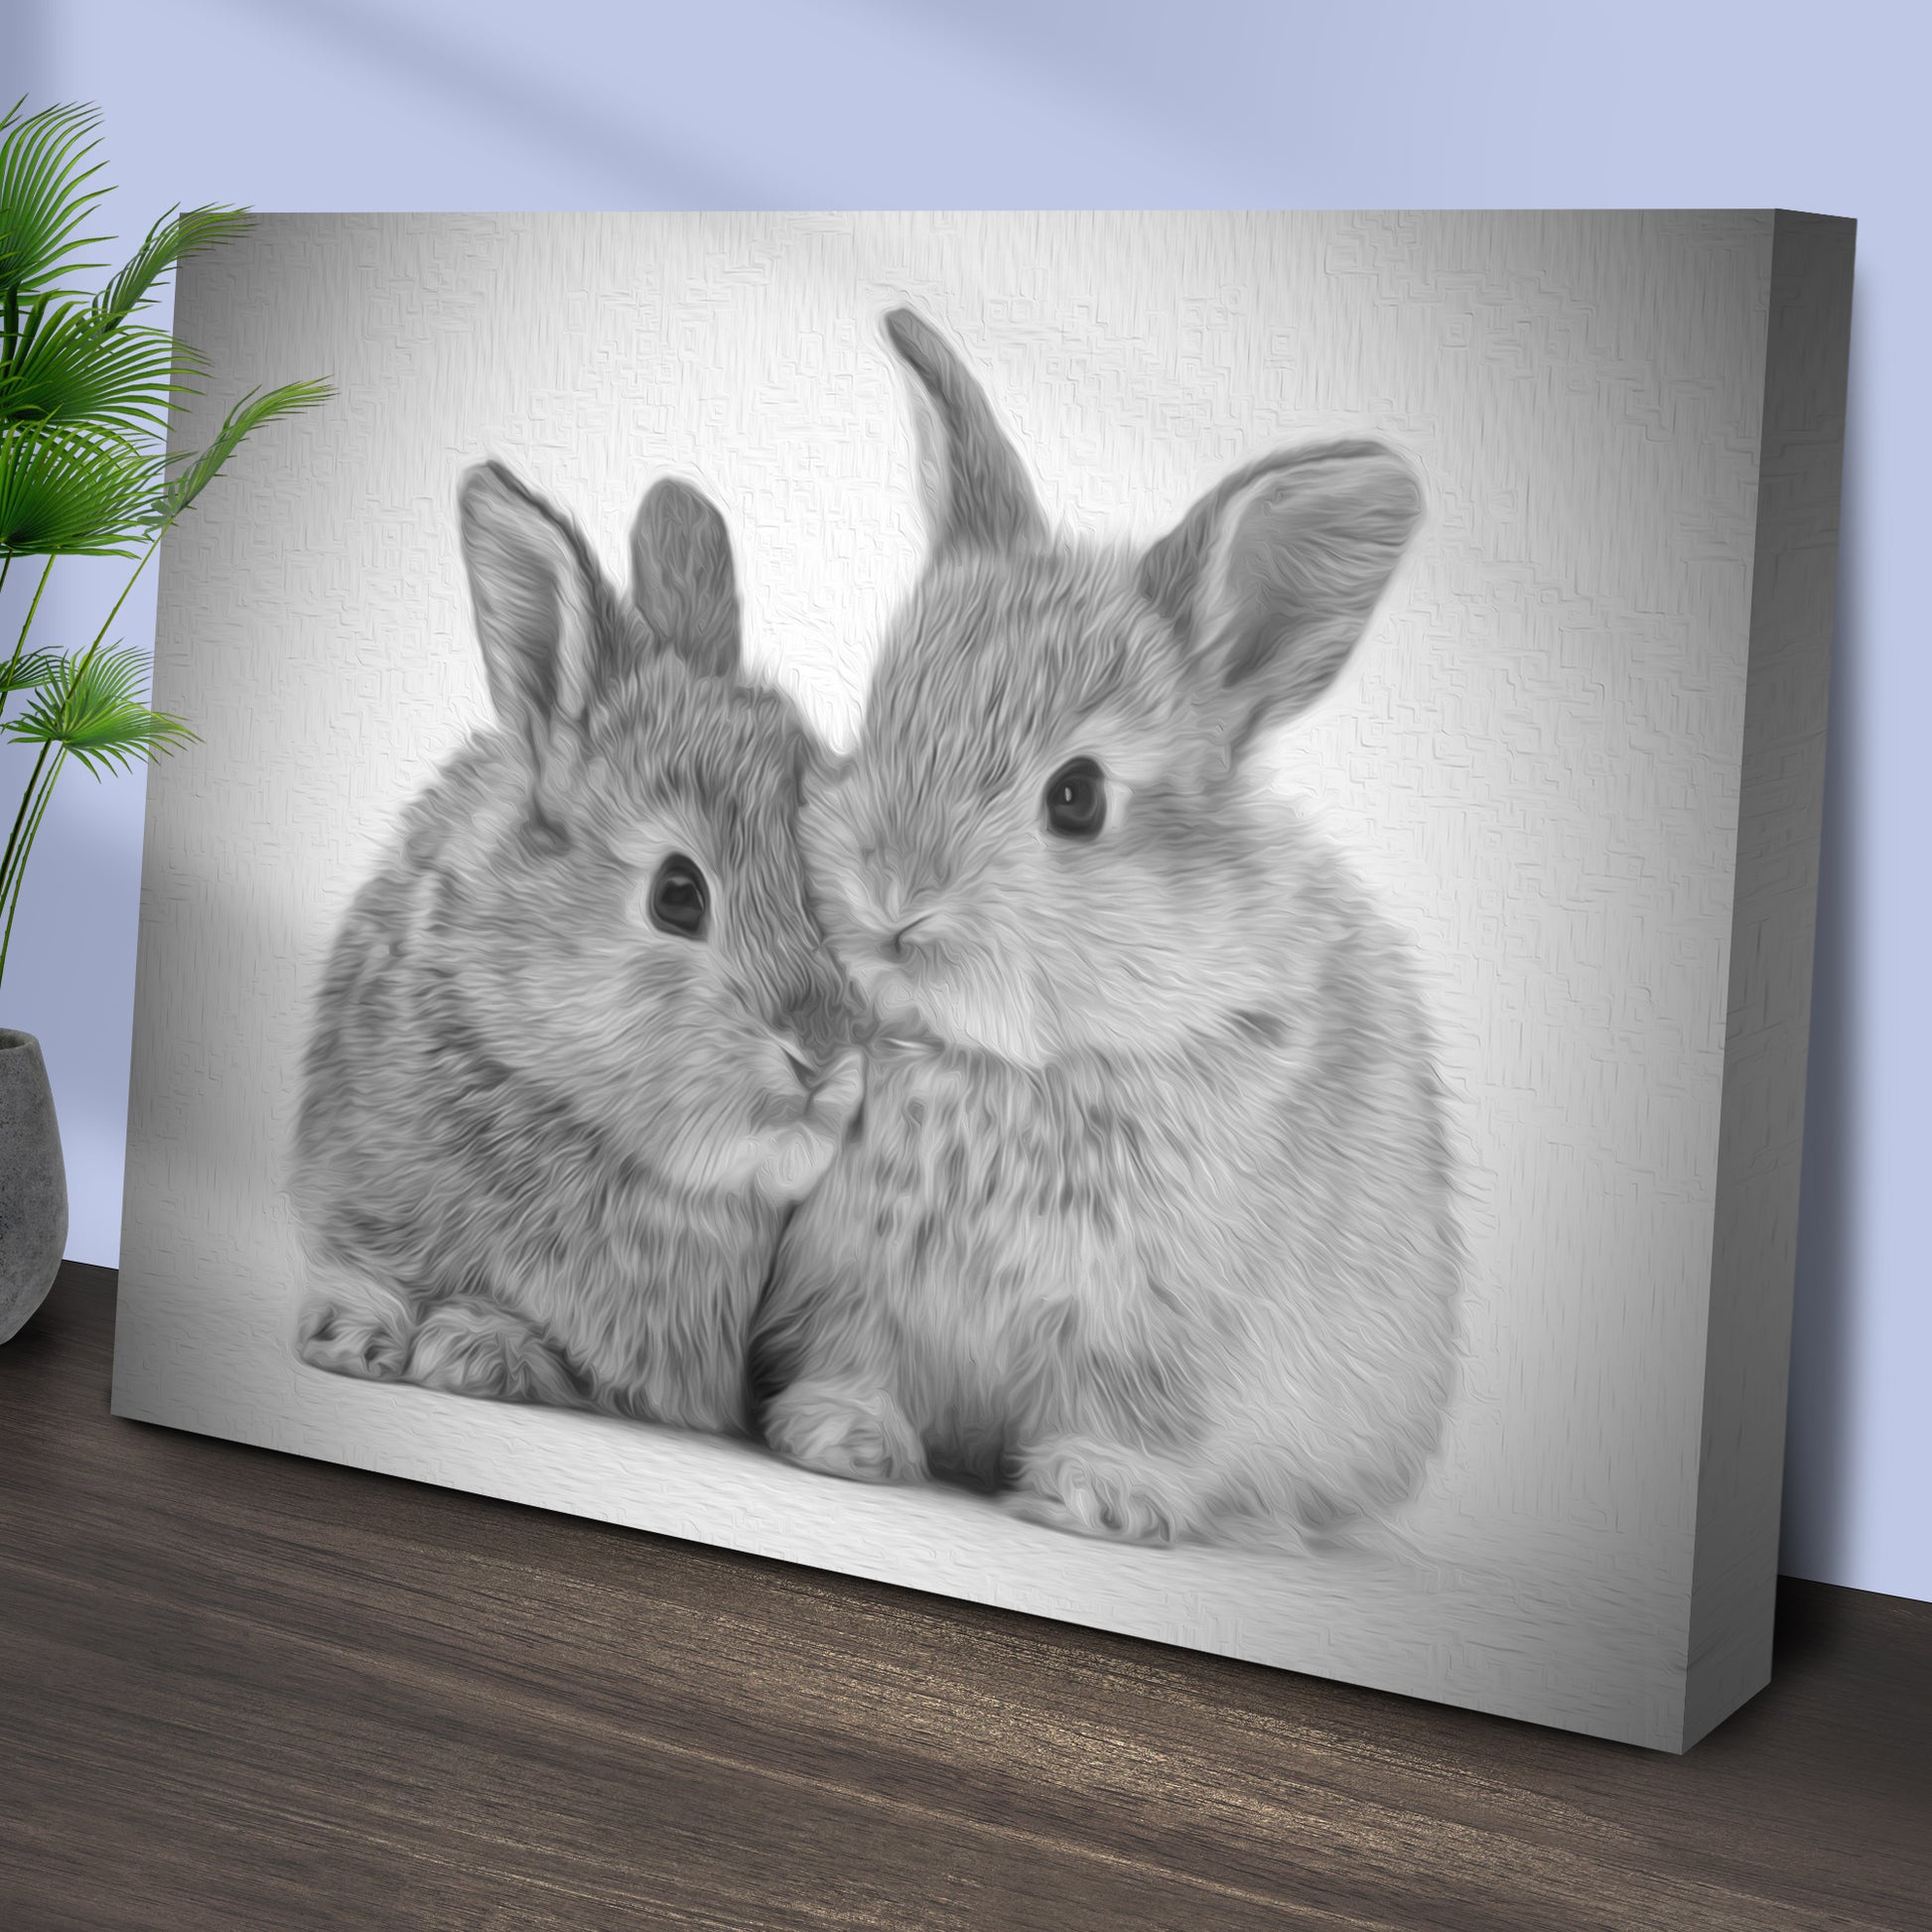 Gray Rabbits Sketch Canvas Wall Art Style 1 - Image by Tailored Canvases